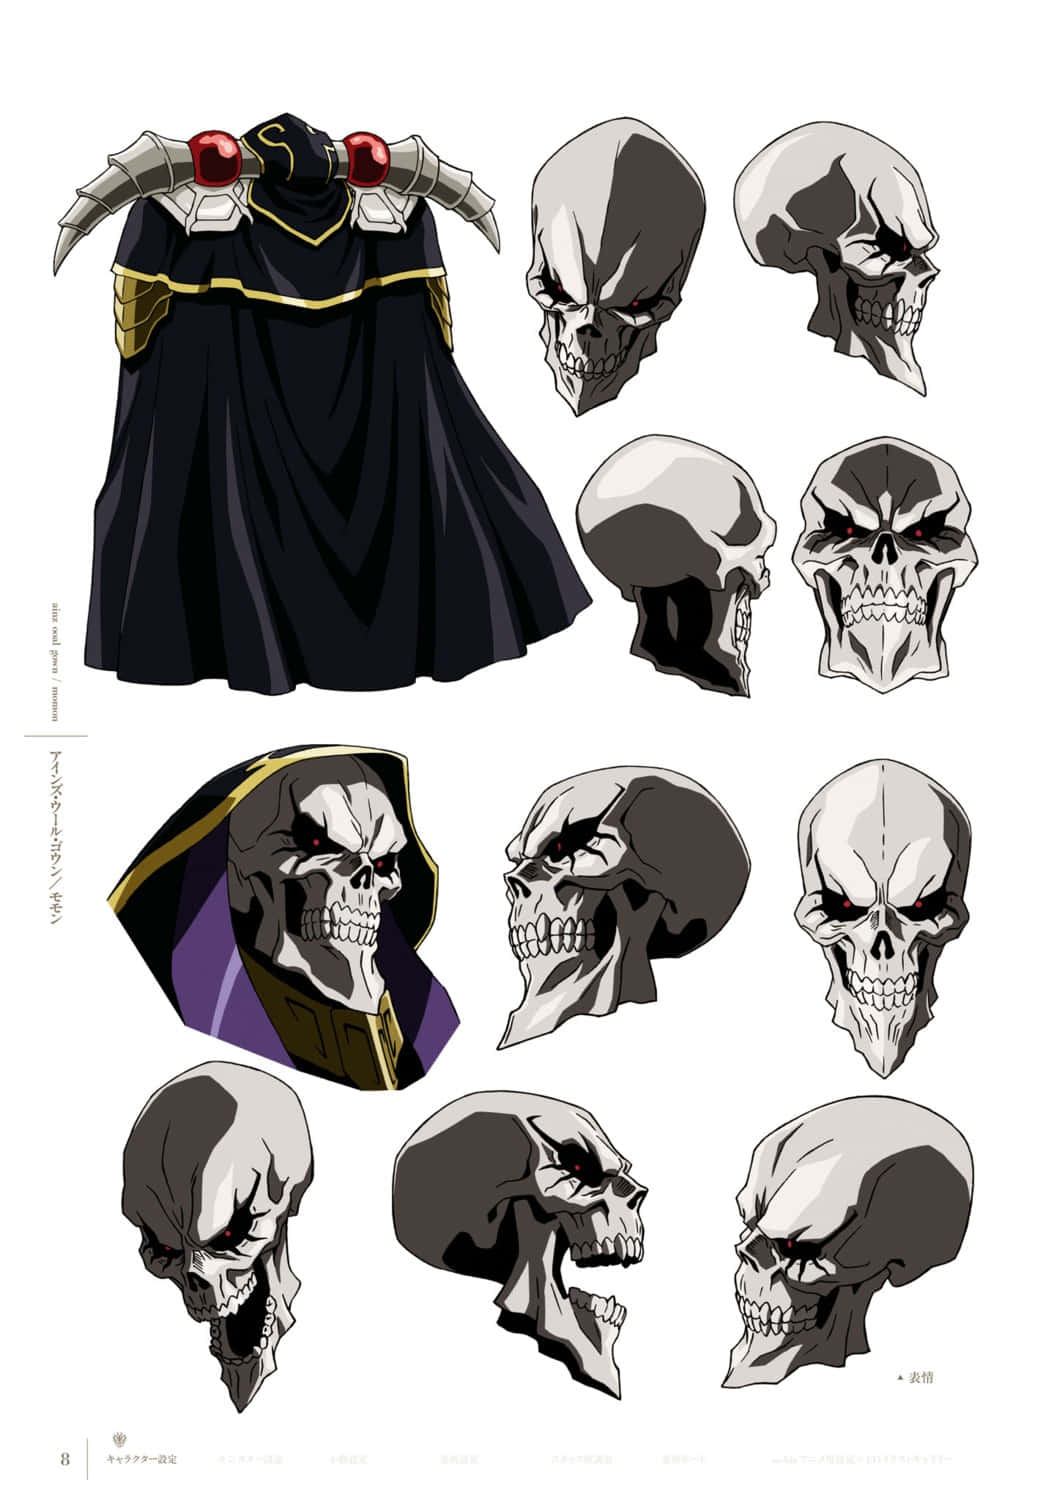 Immaginedelle Teste Di Overlord Skulls Of Ainz Ooal Gown